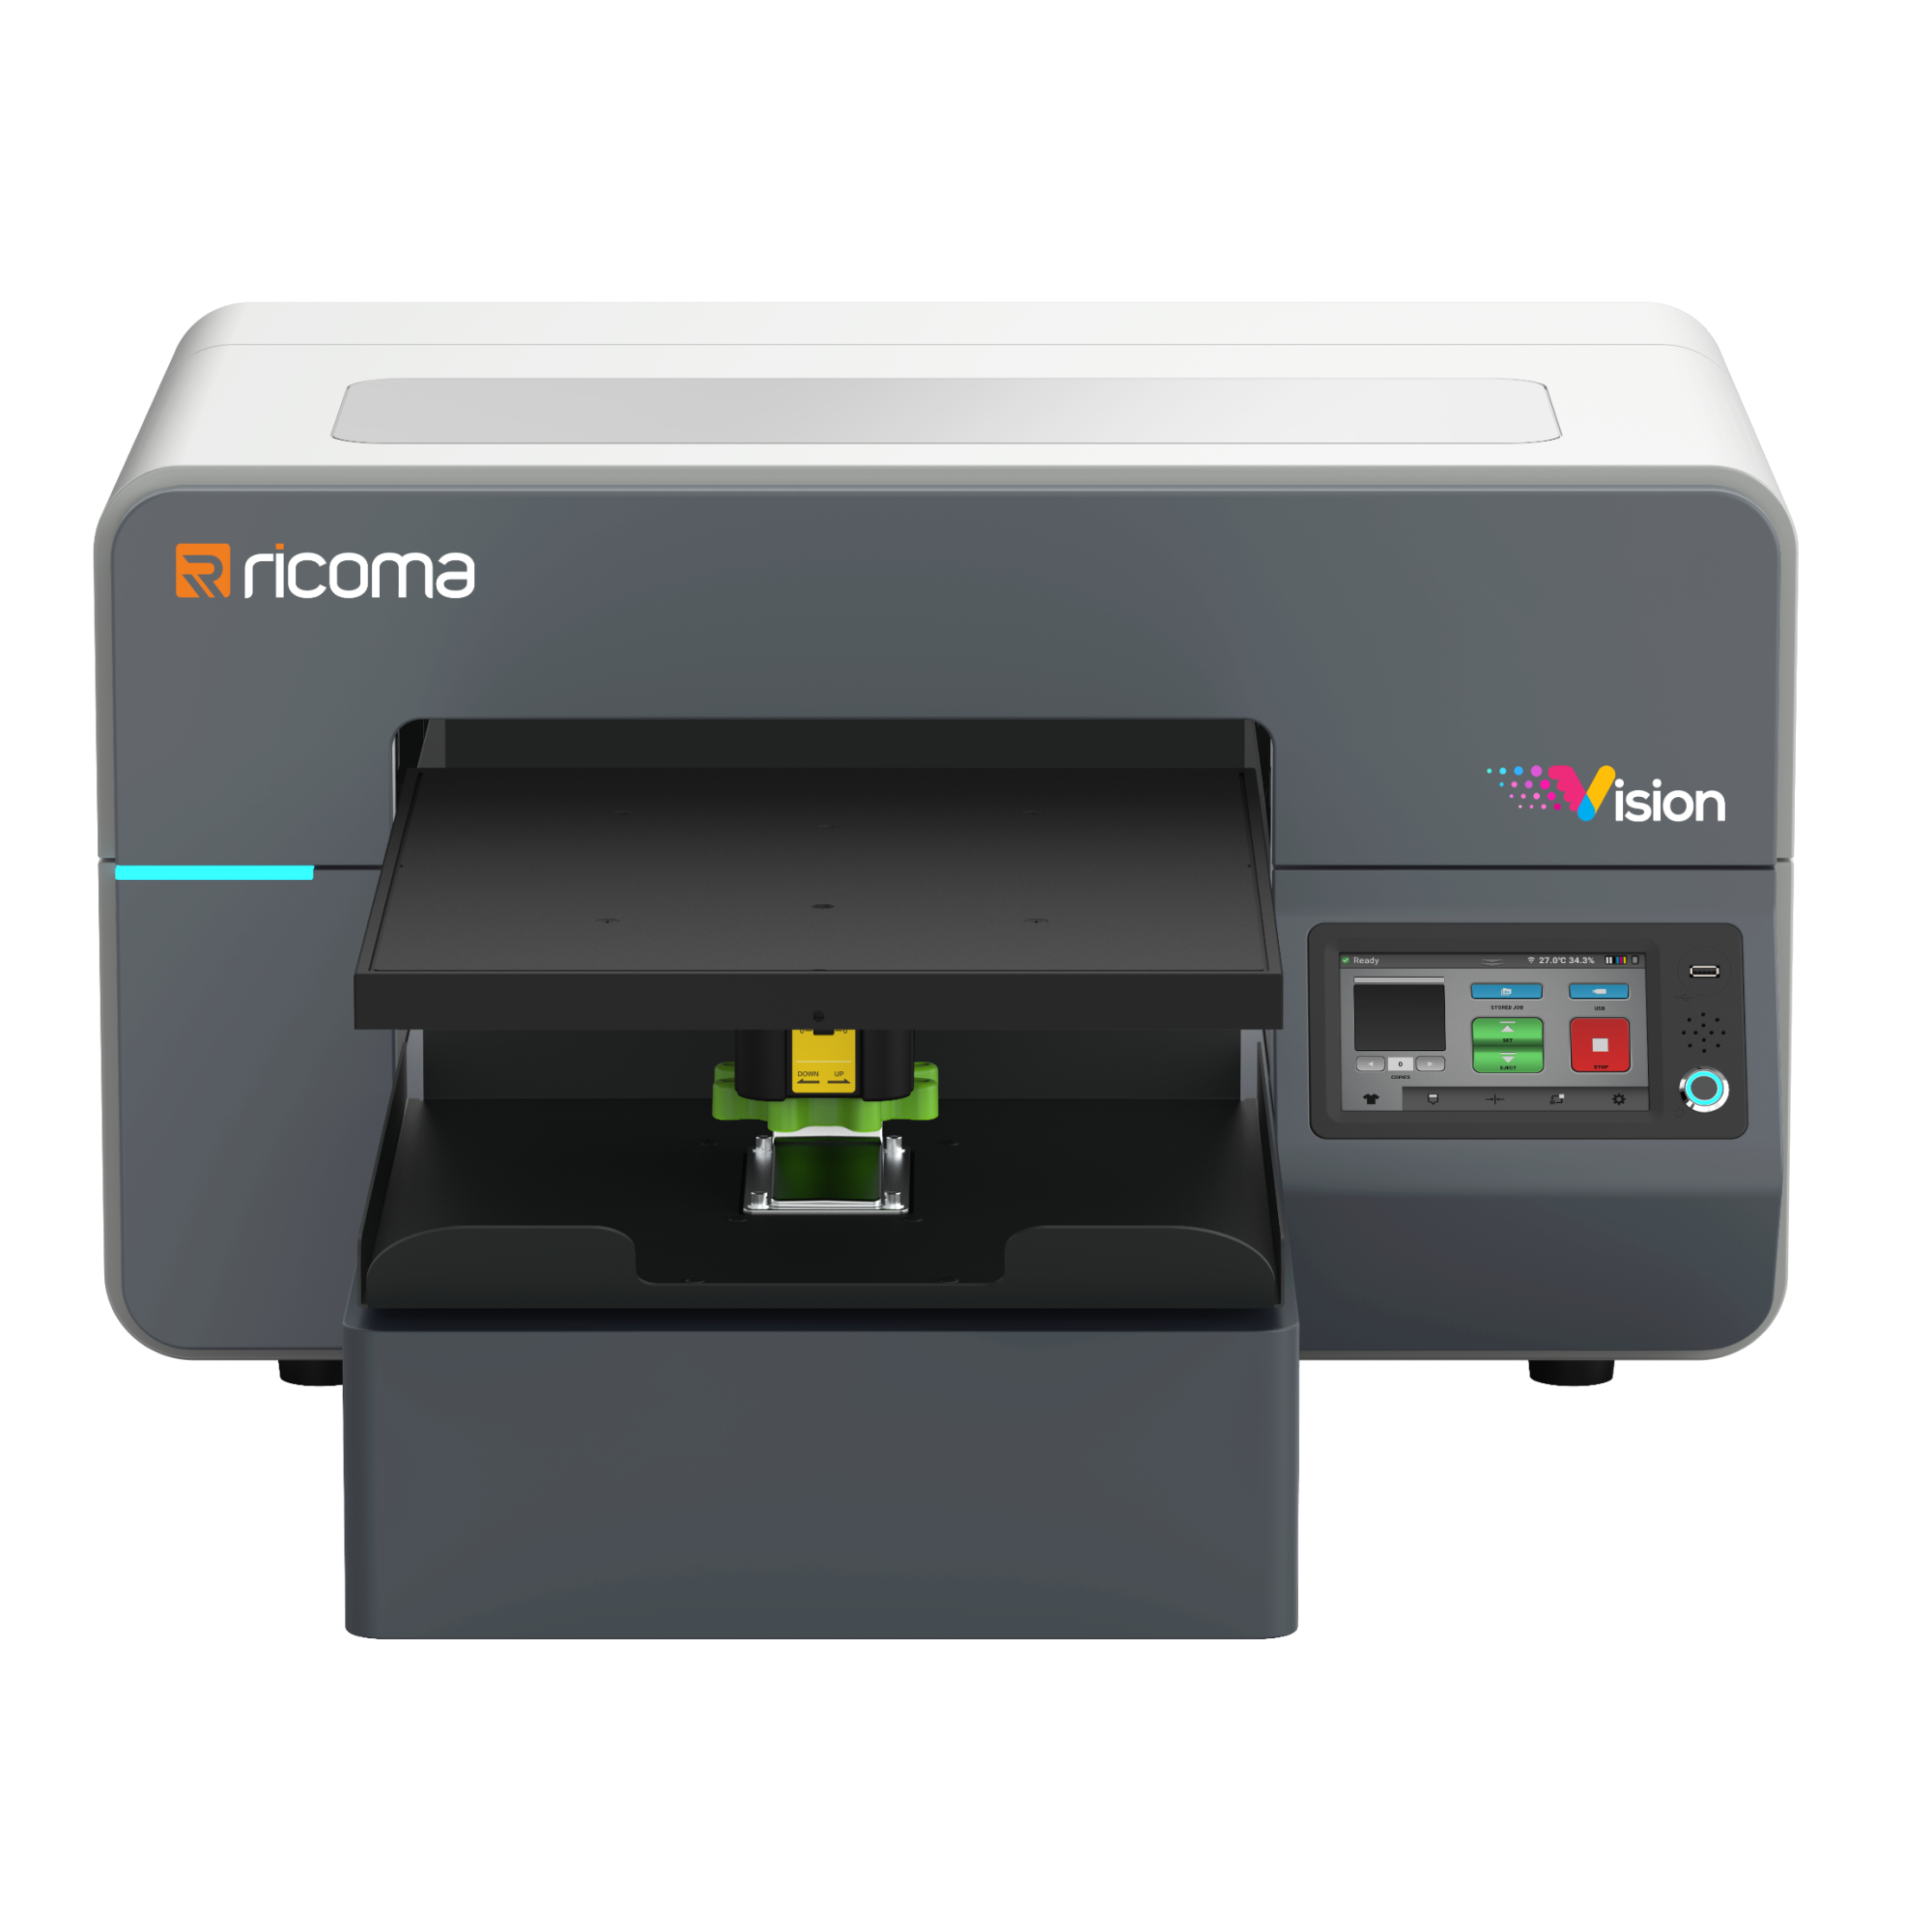 NO RETURN: Complete A3 DTF (Direct to Film) Printer System - Wide